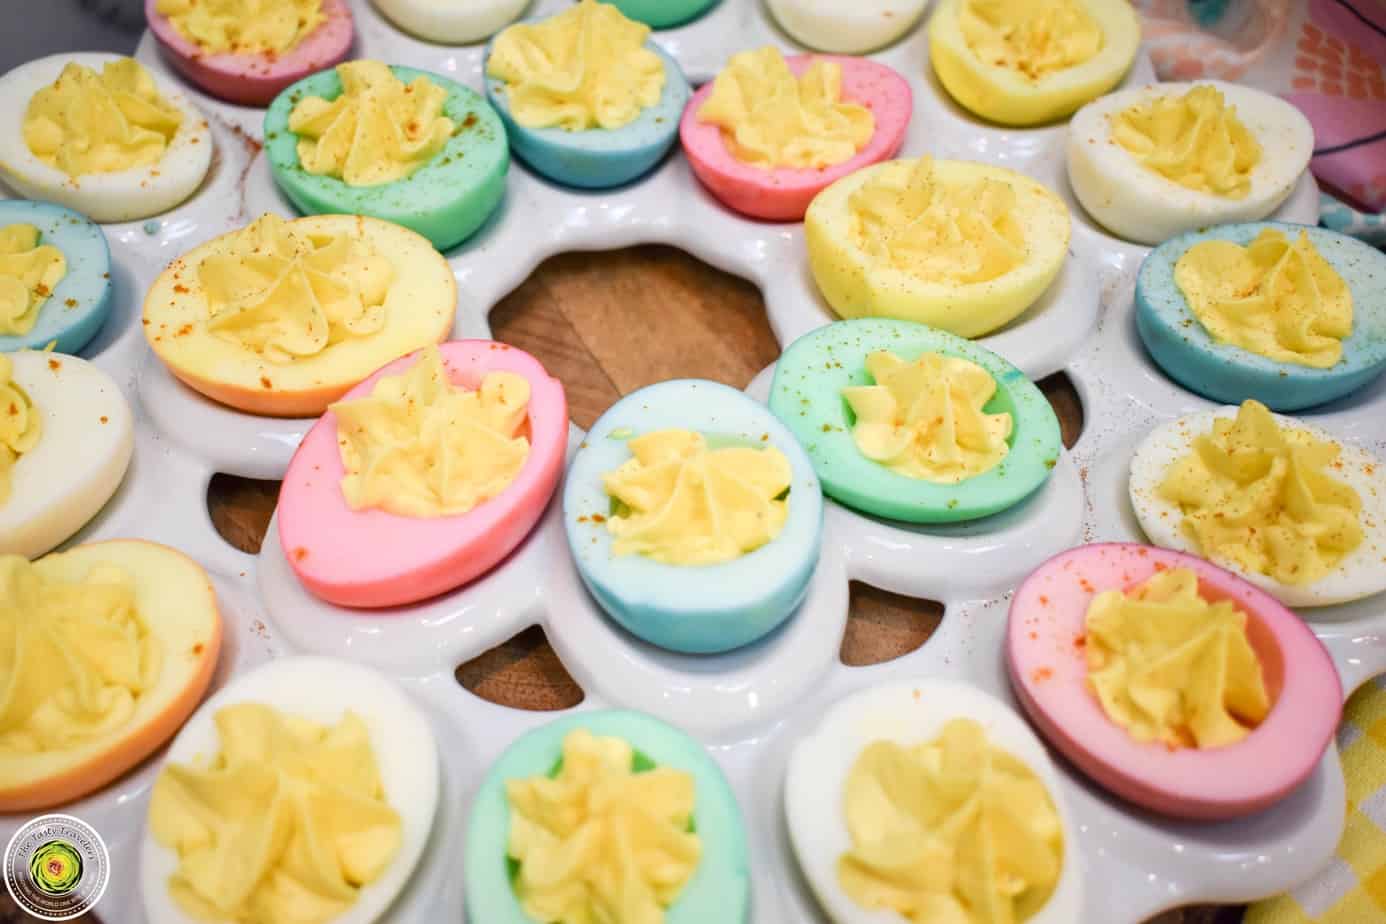 Deviled eggs Instant Pot recipe. The eggs are dyed bright colors of pink, blue, and green